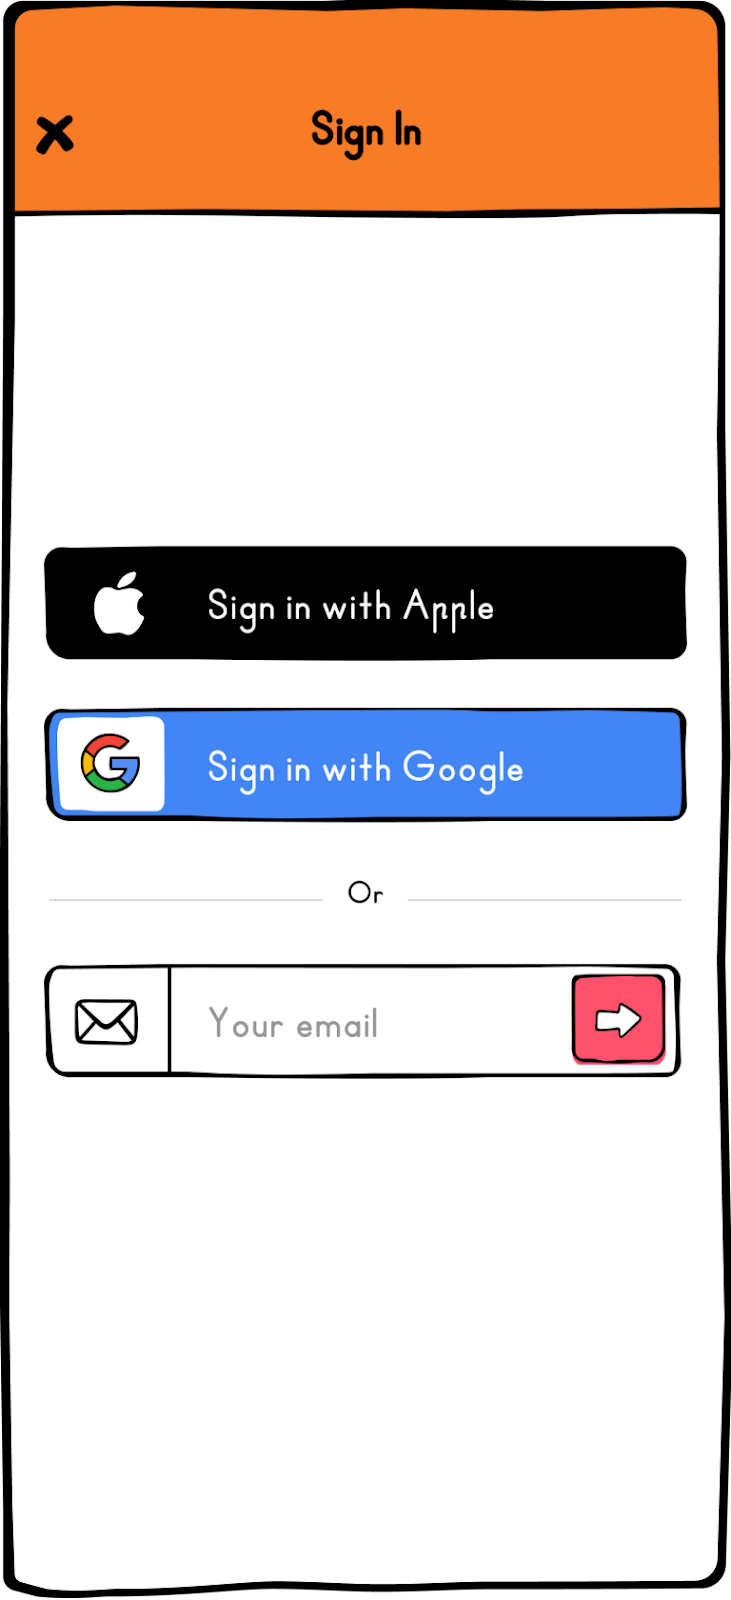 Quickly sign in using your saved Gmail or Apple ID